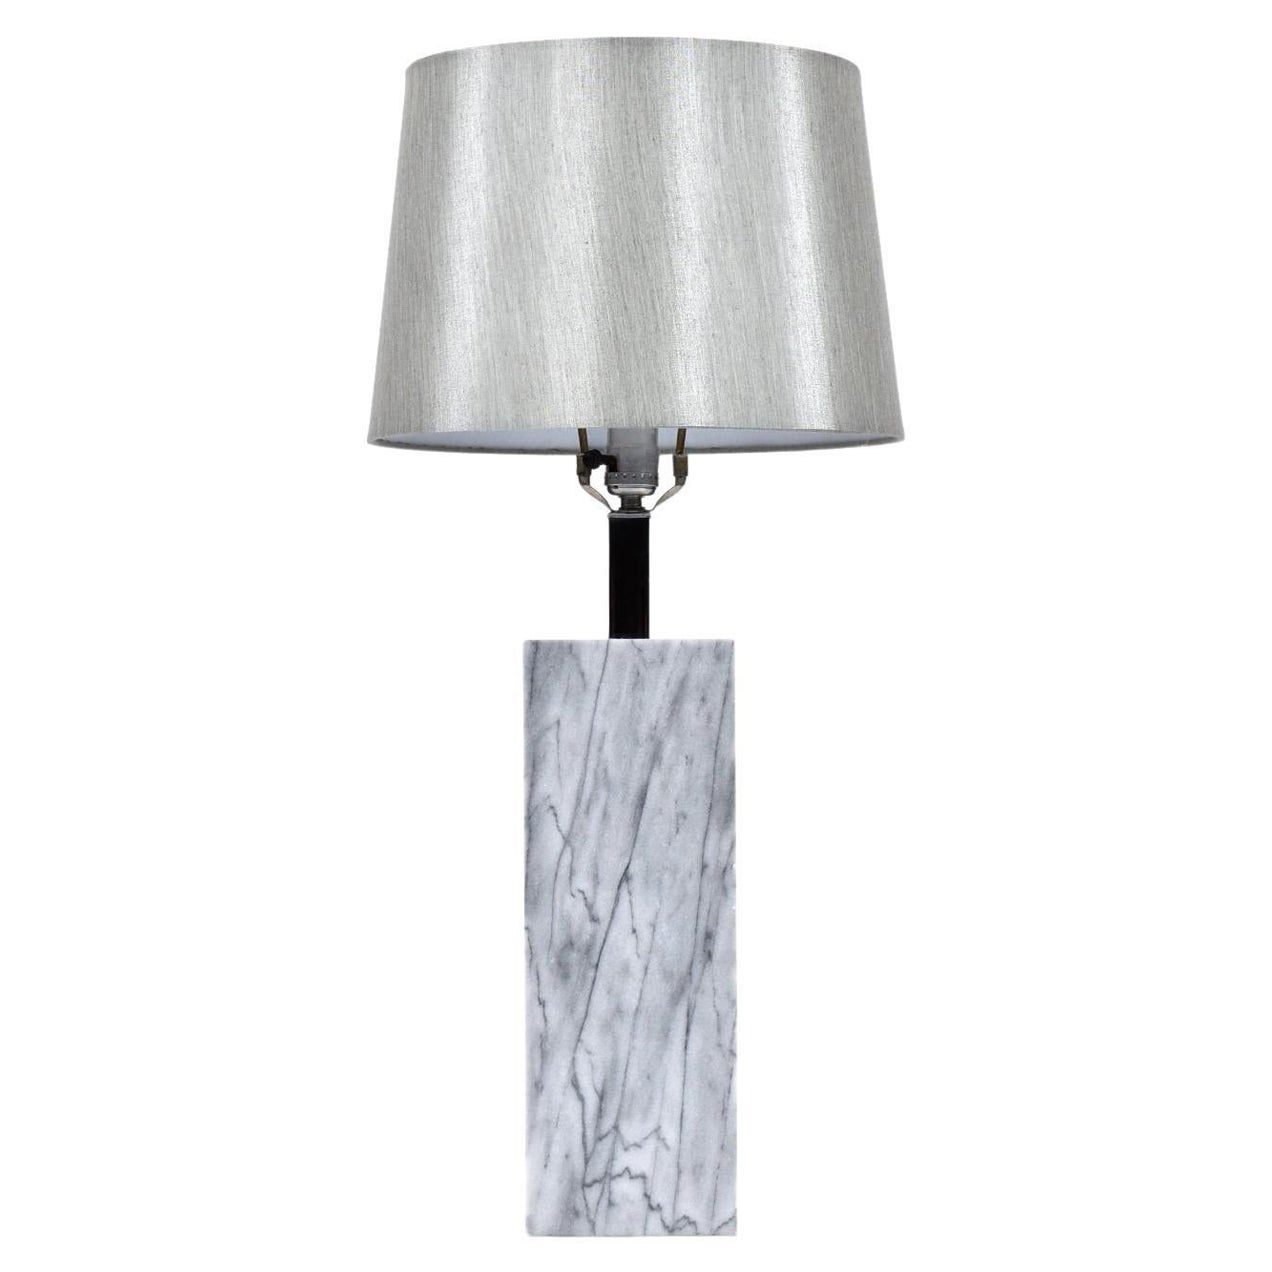 Nessen Style Gray Marble Table Lamp with Chrome Neck and Silver Shade